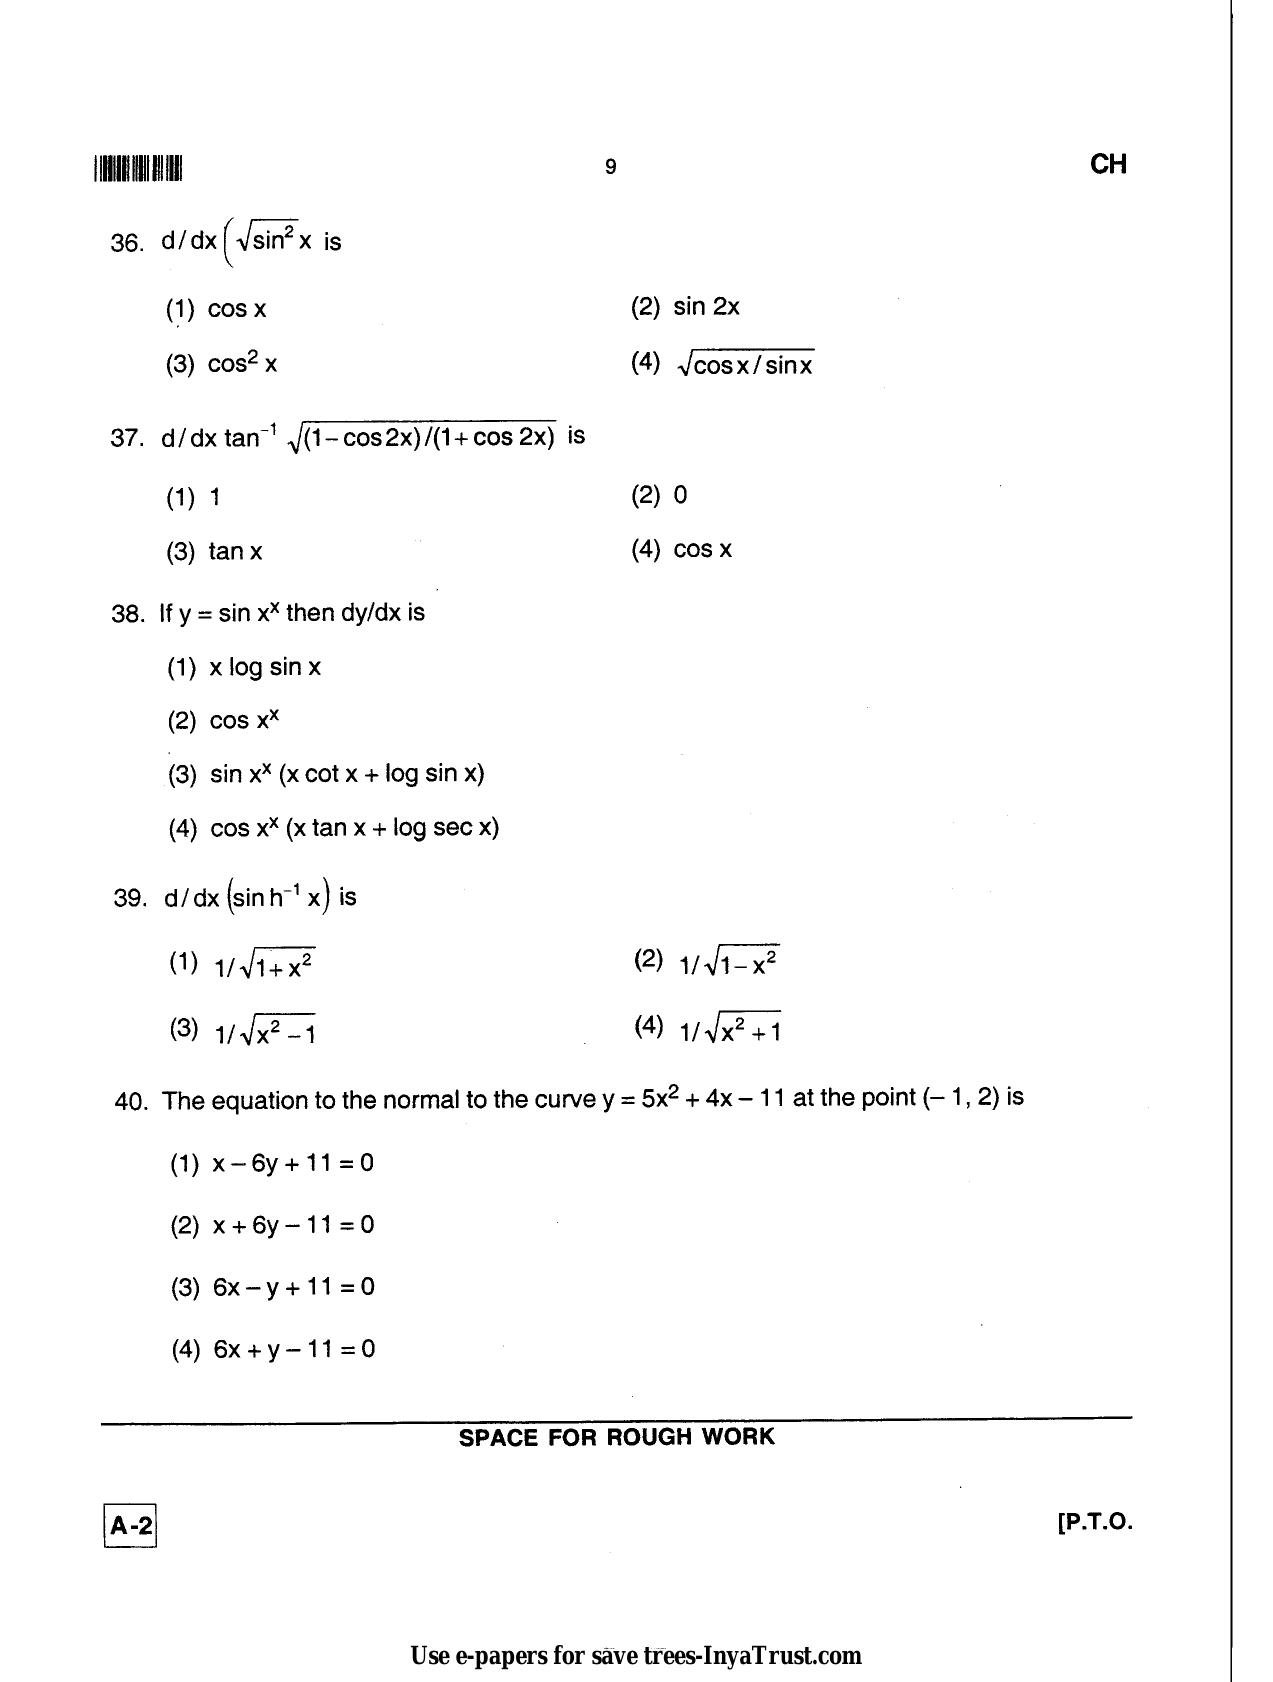 Karnataka Diploma CET- 2013 Chemical Engineering / Polymer Technology Question Paper - Page 9